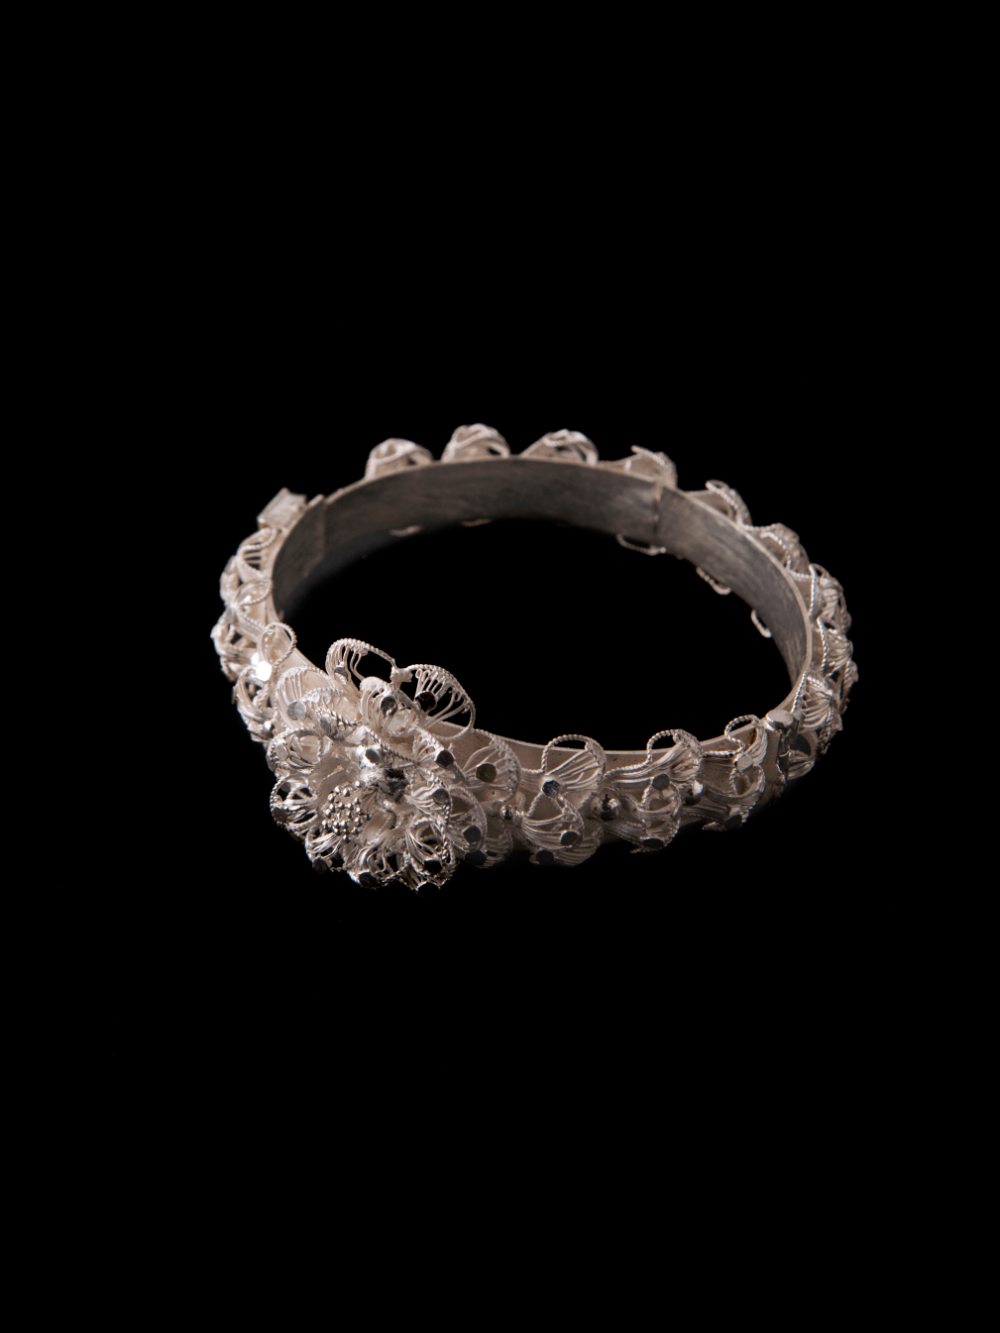 Silver Bangles for women handmade with Filigree